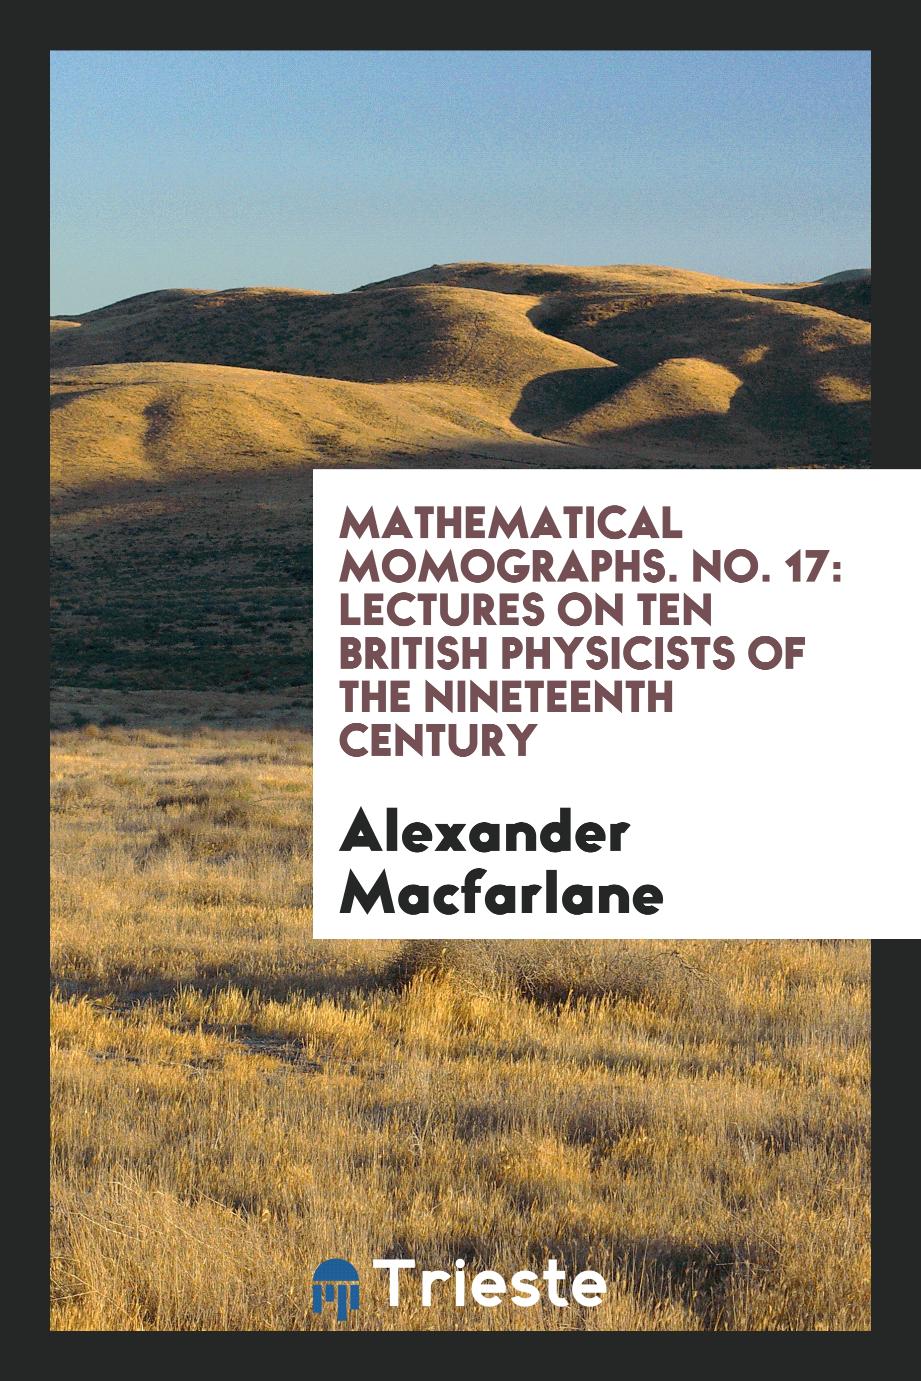 Mathematical Momographs. No. 17: Lectures on Ten British Physicists of the Nineteenth Century